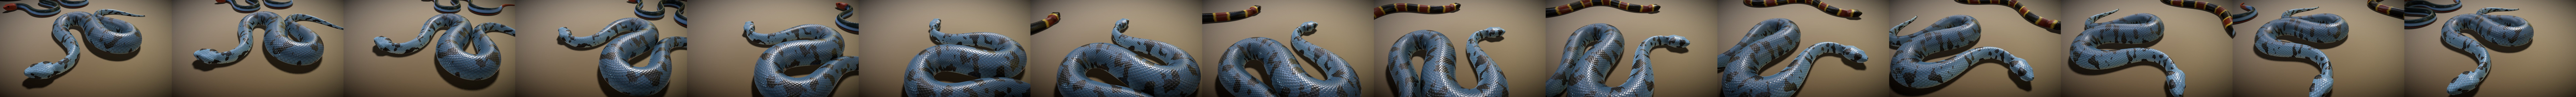 Animated Snakes Pack, Characters